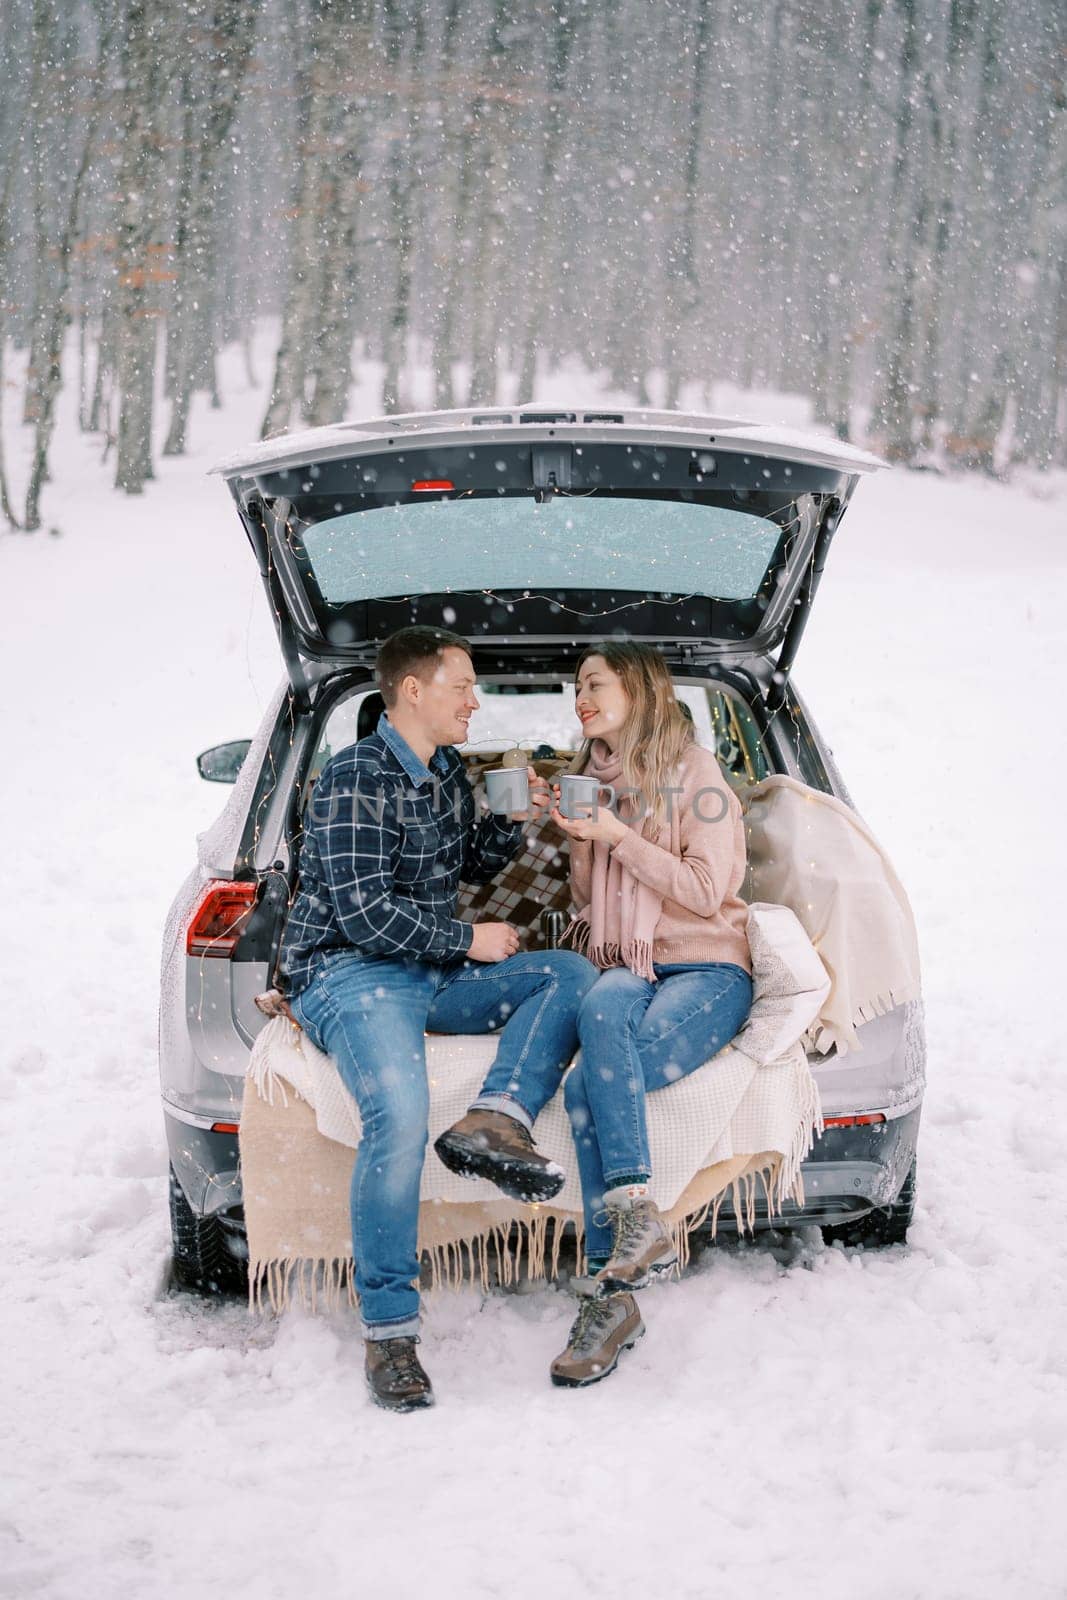 Smiling man and woman with cups in their hands are sitting in the trunk of a car in a snowy forest by Nadtochiy